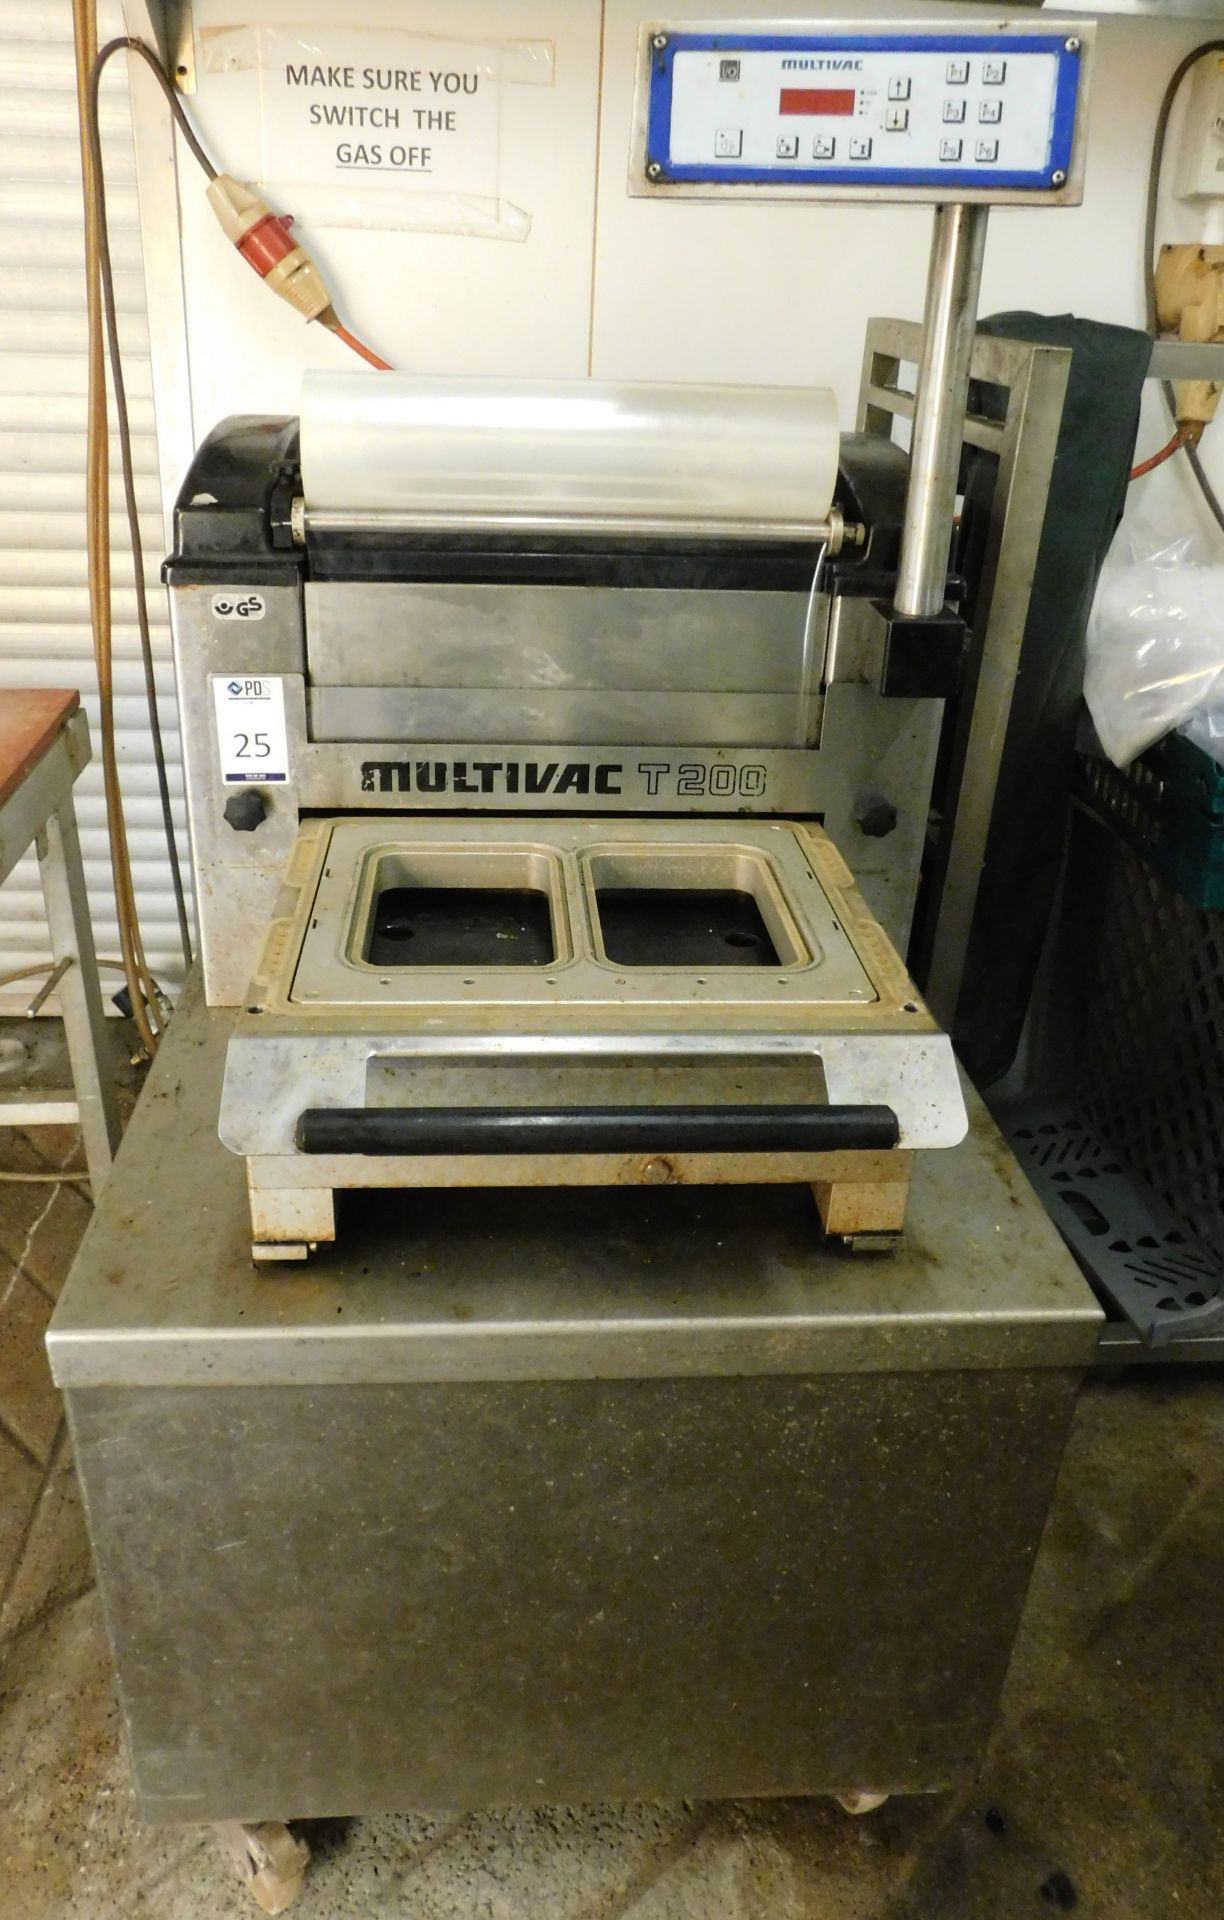 Multivac T200 Semi-automatic tray sealer (2005), Serial Number 101677 (Location: Thame. Please Refer